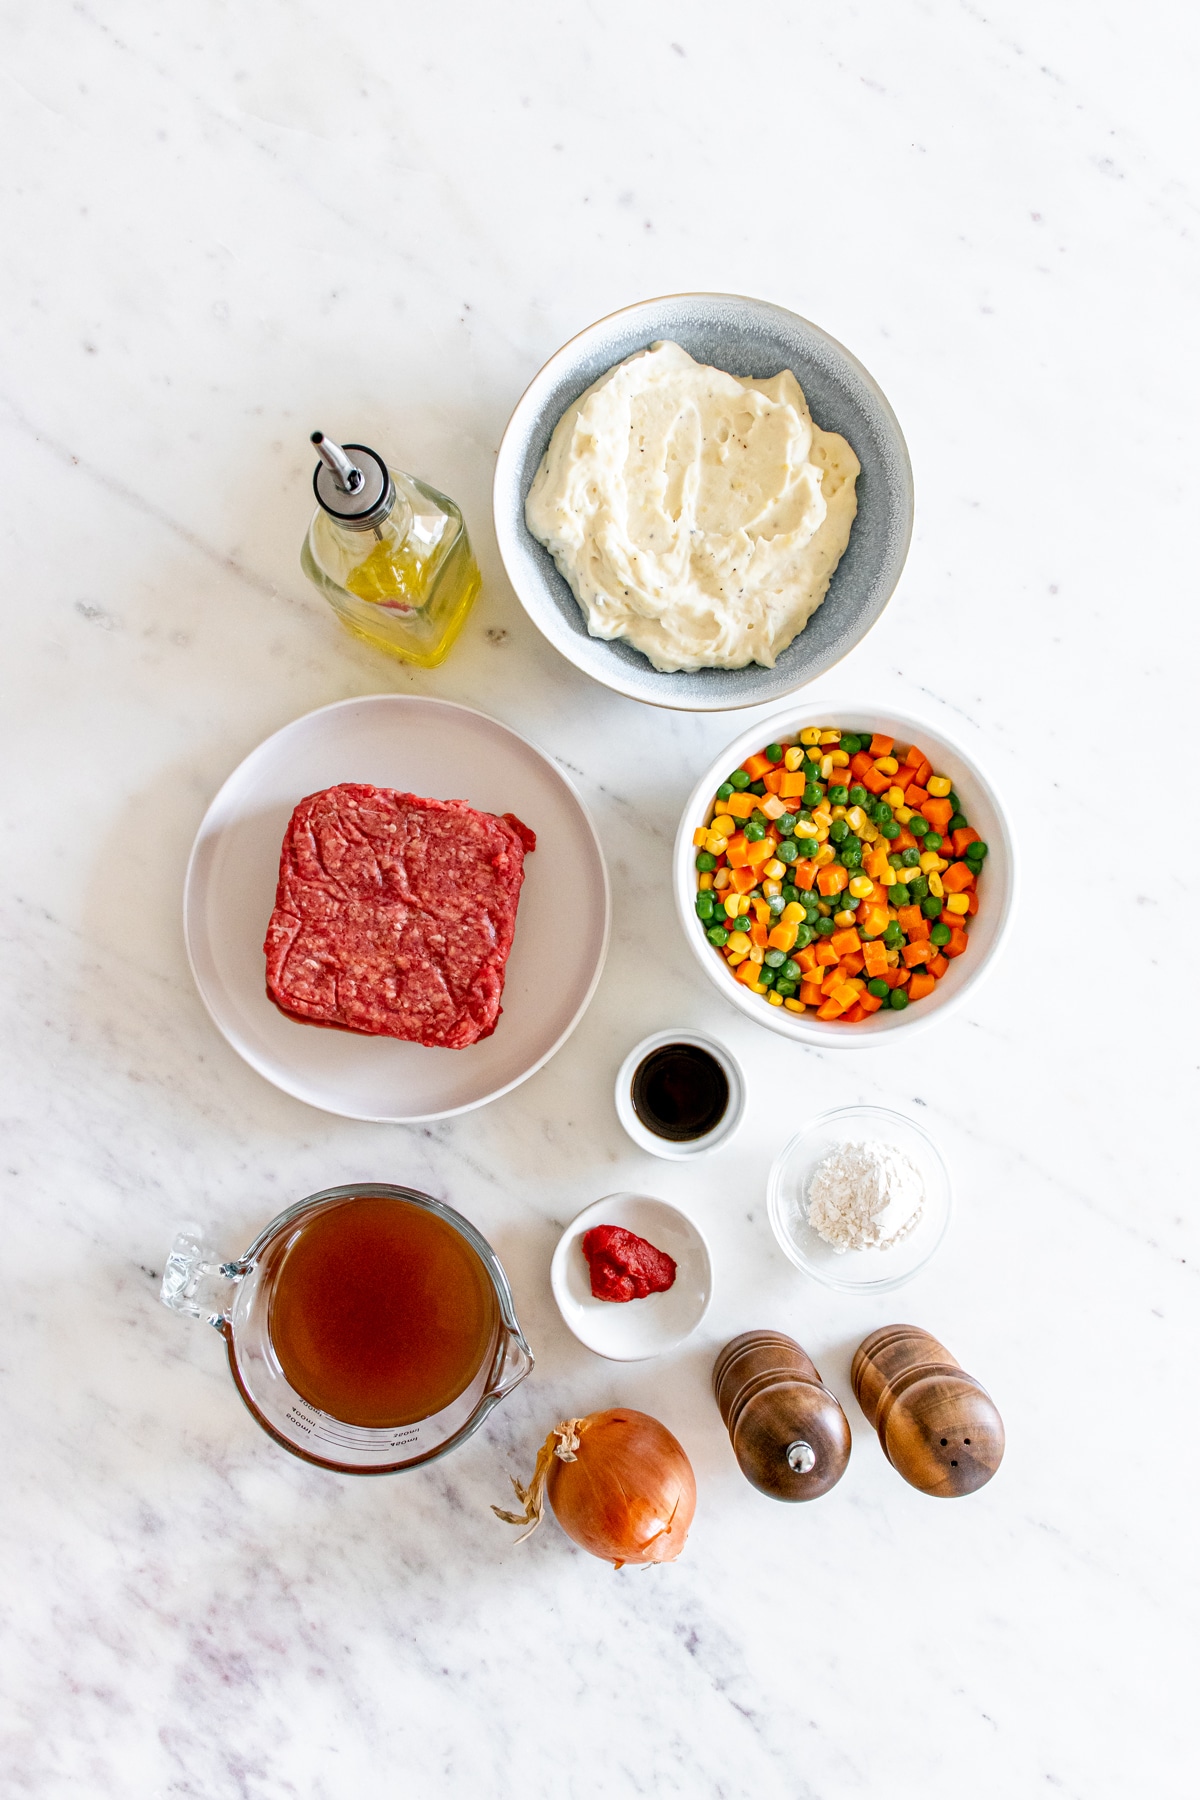 Ingredients for Shepherd's Pie on a white counter. These include: beef, mashed potatoes, olive oil, yellow onion, lean ground beef, all-purpose flour, beef broth, frozen mixed veggies, tomato paste and Worcestershire sauce, salt and pepper, and fresh parshley.